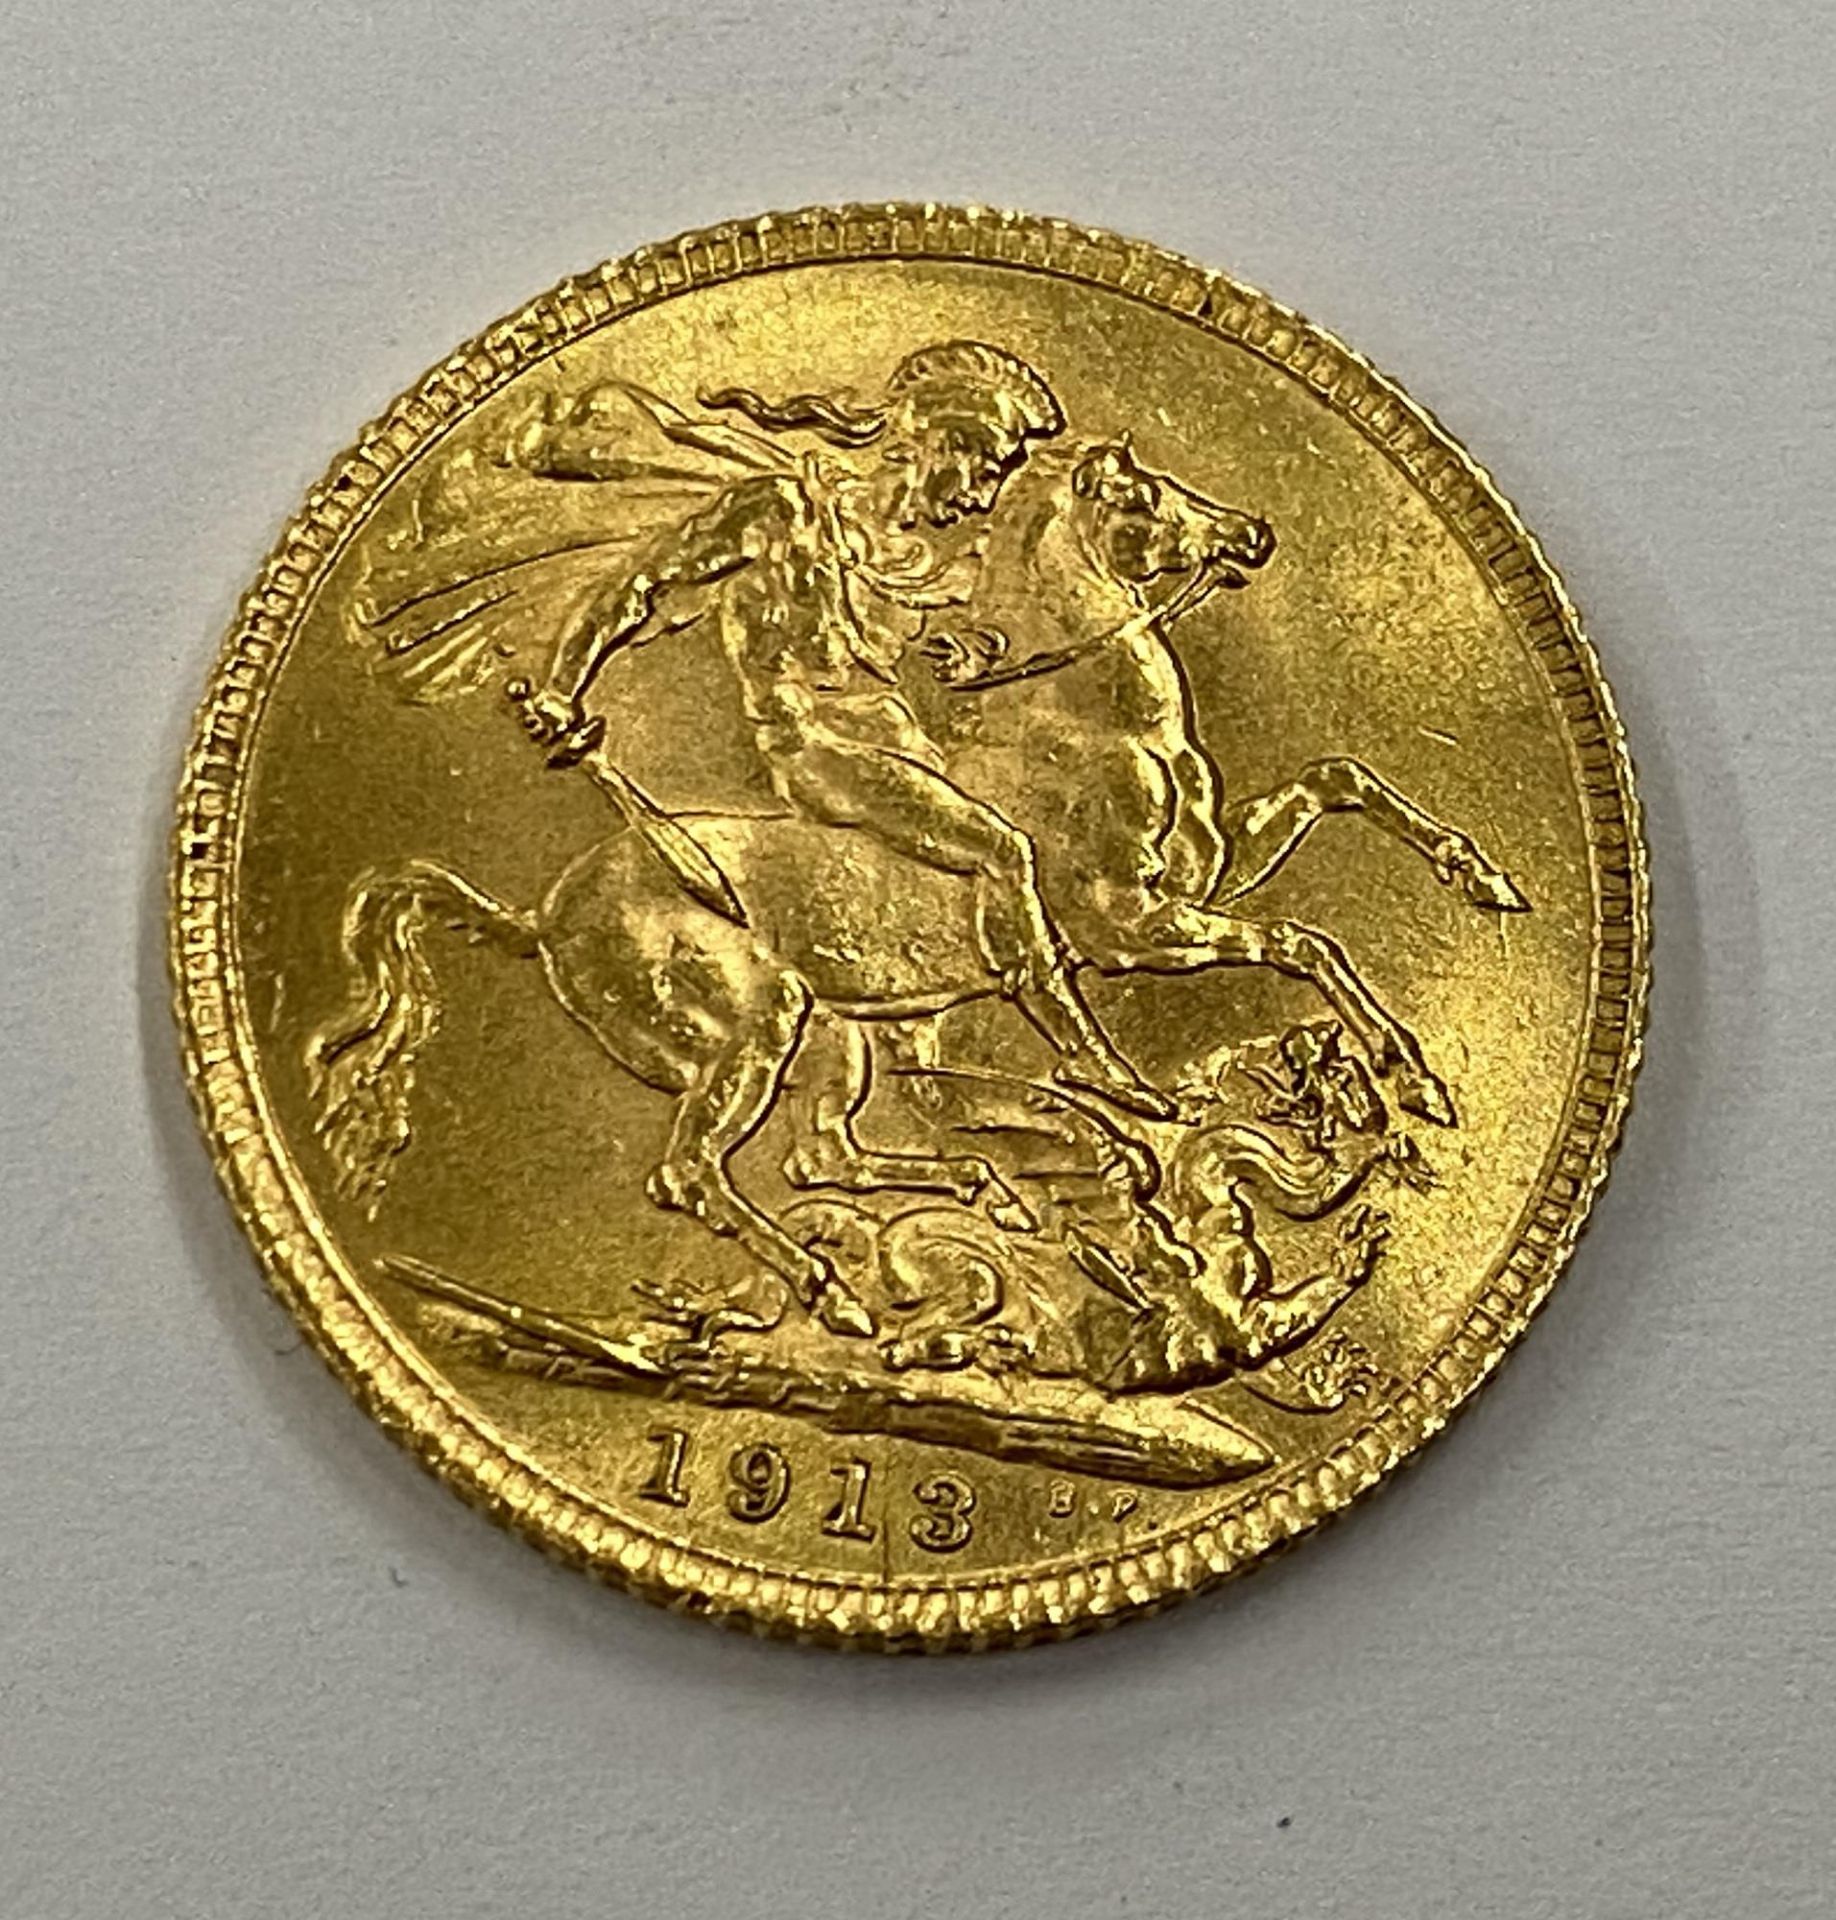 A GEORGE V 1913 GOLD FULL SOVEREIGN COIN